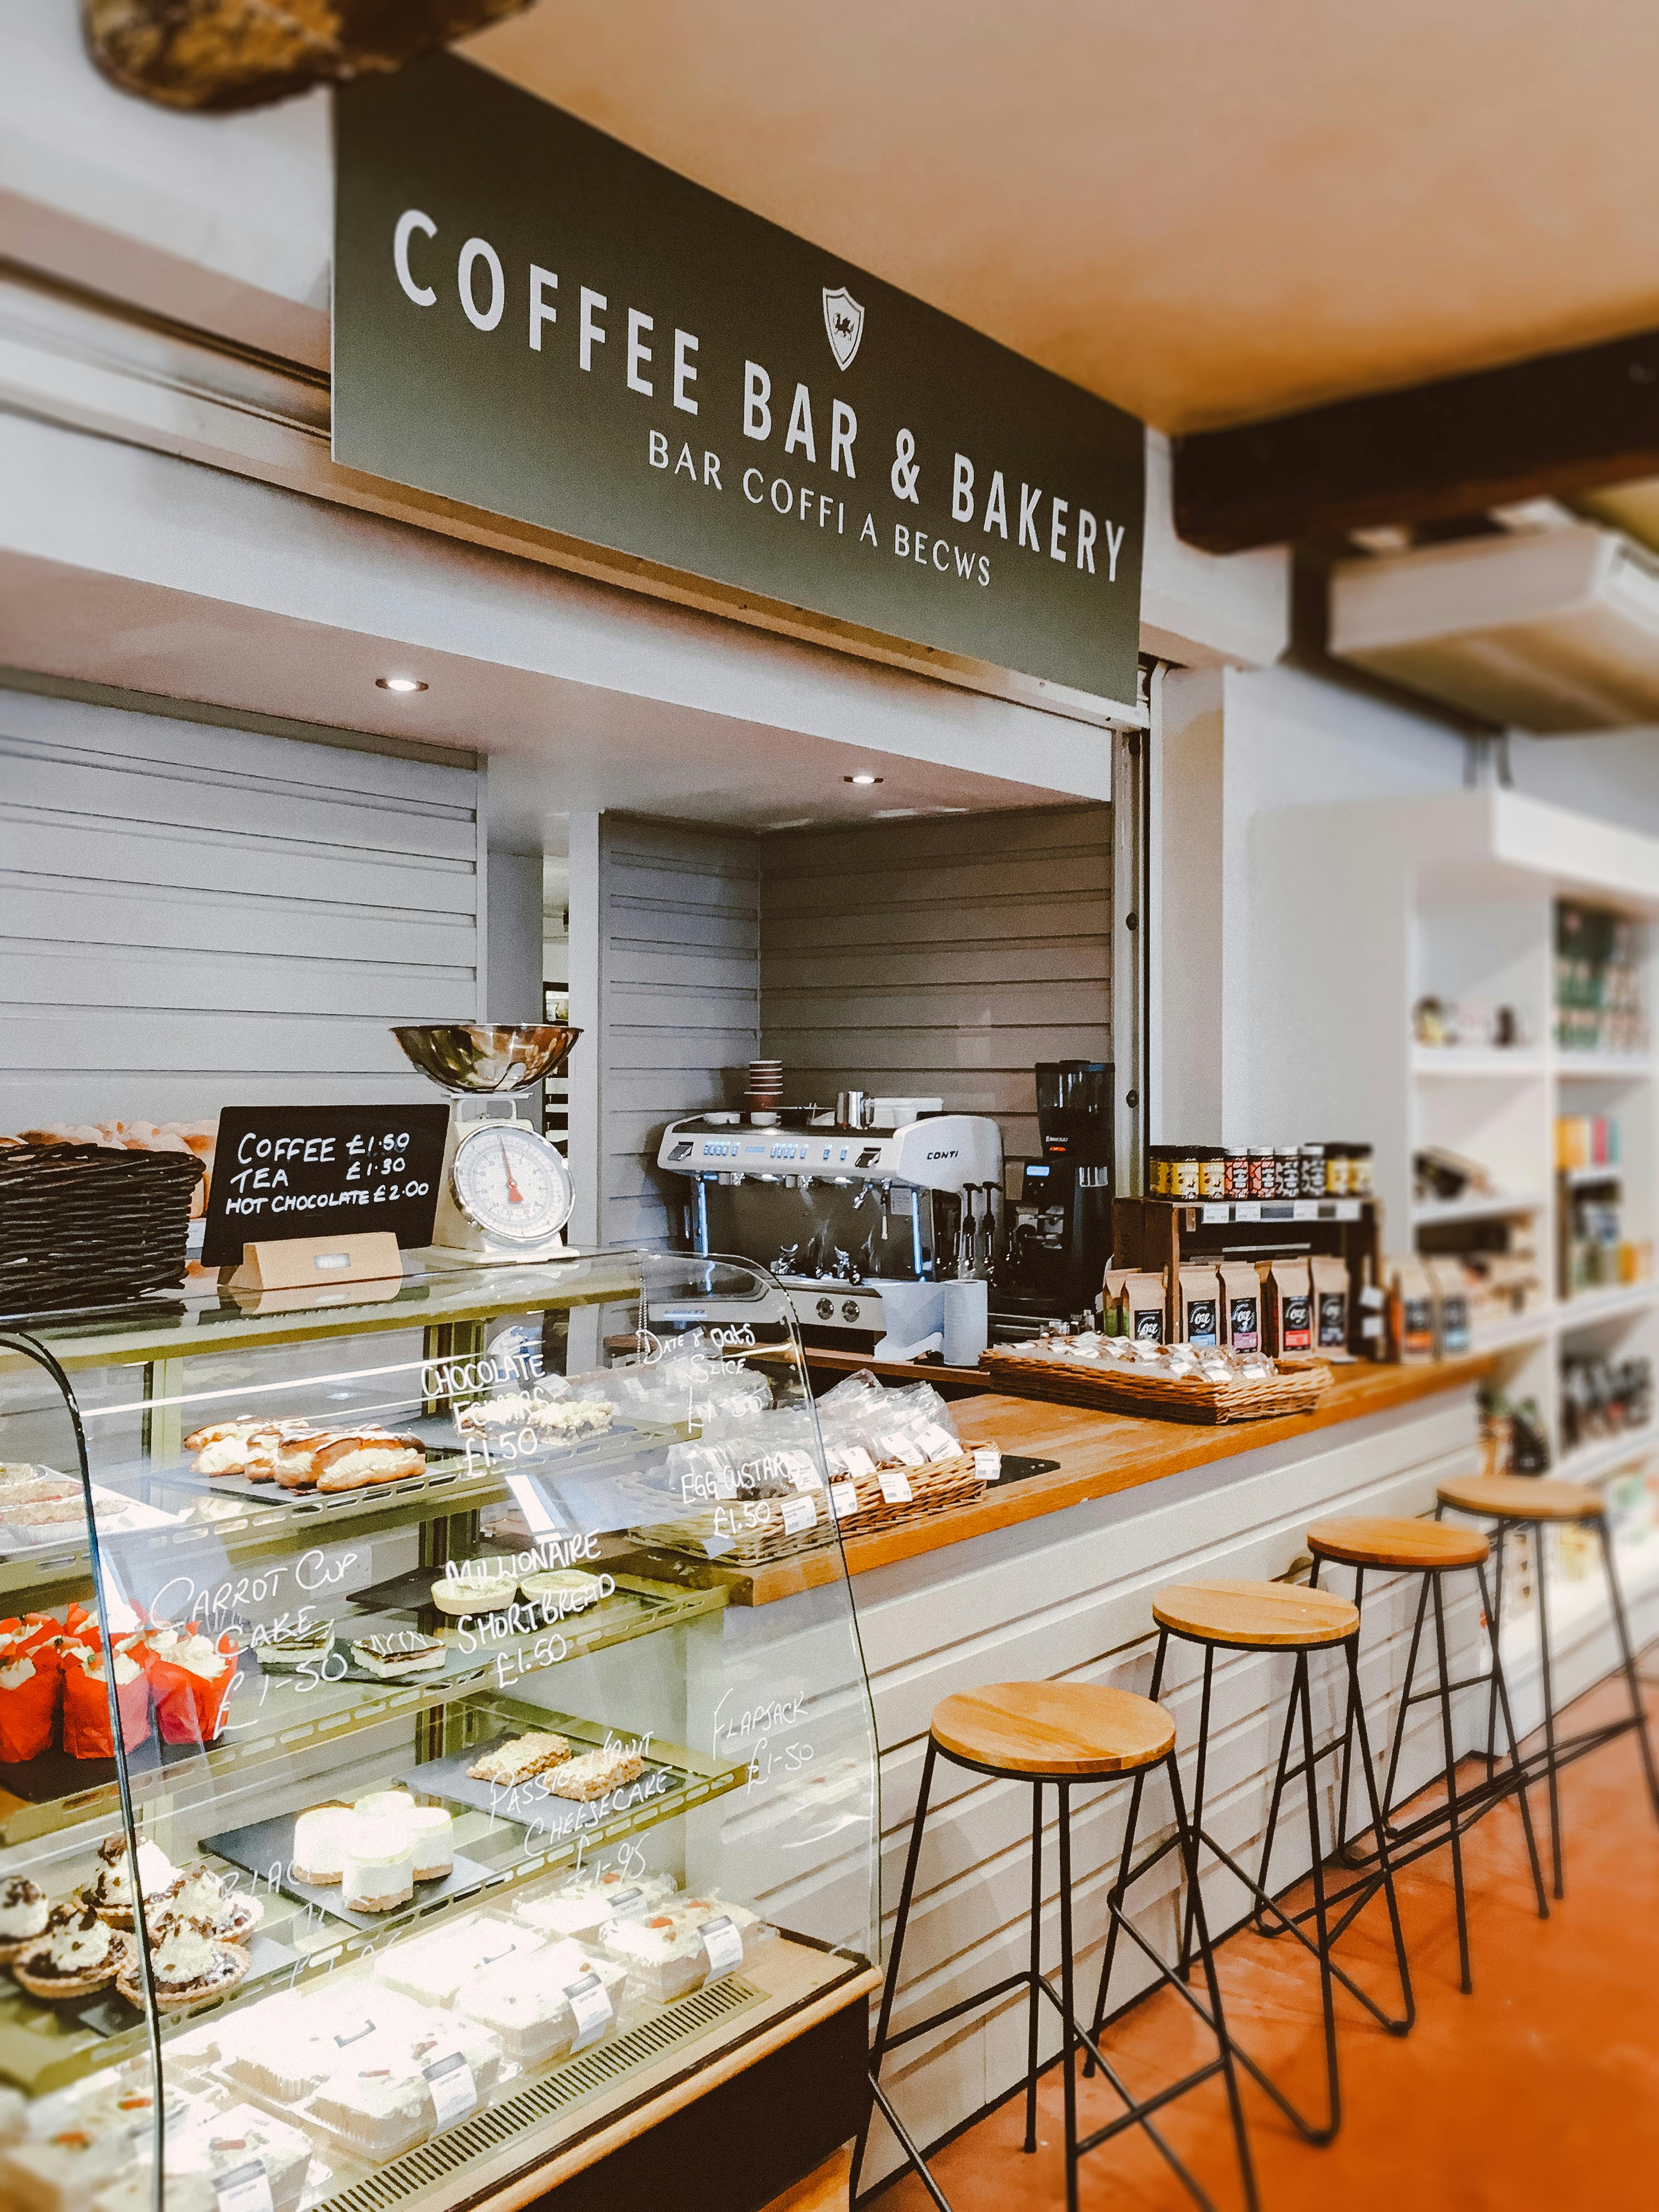 Unfortunately, no bakery was ready to take my order | Source: Pexels